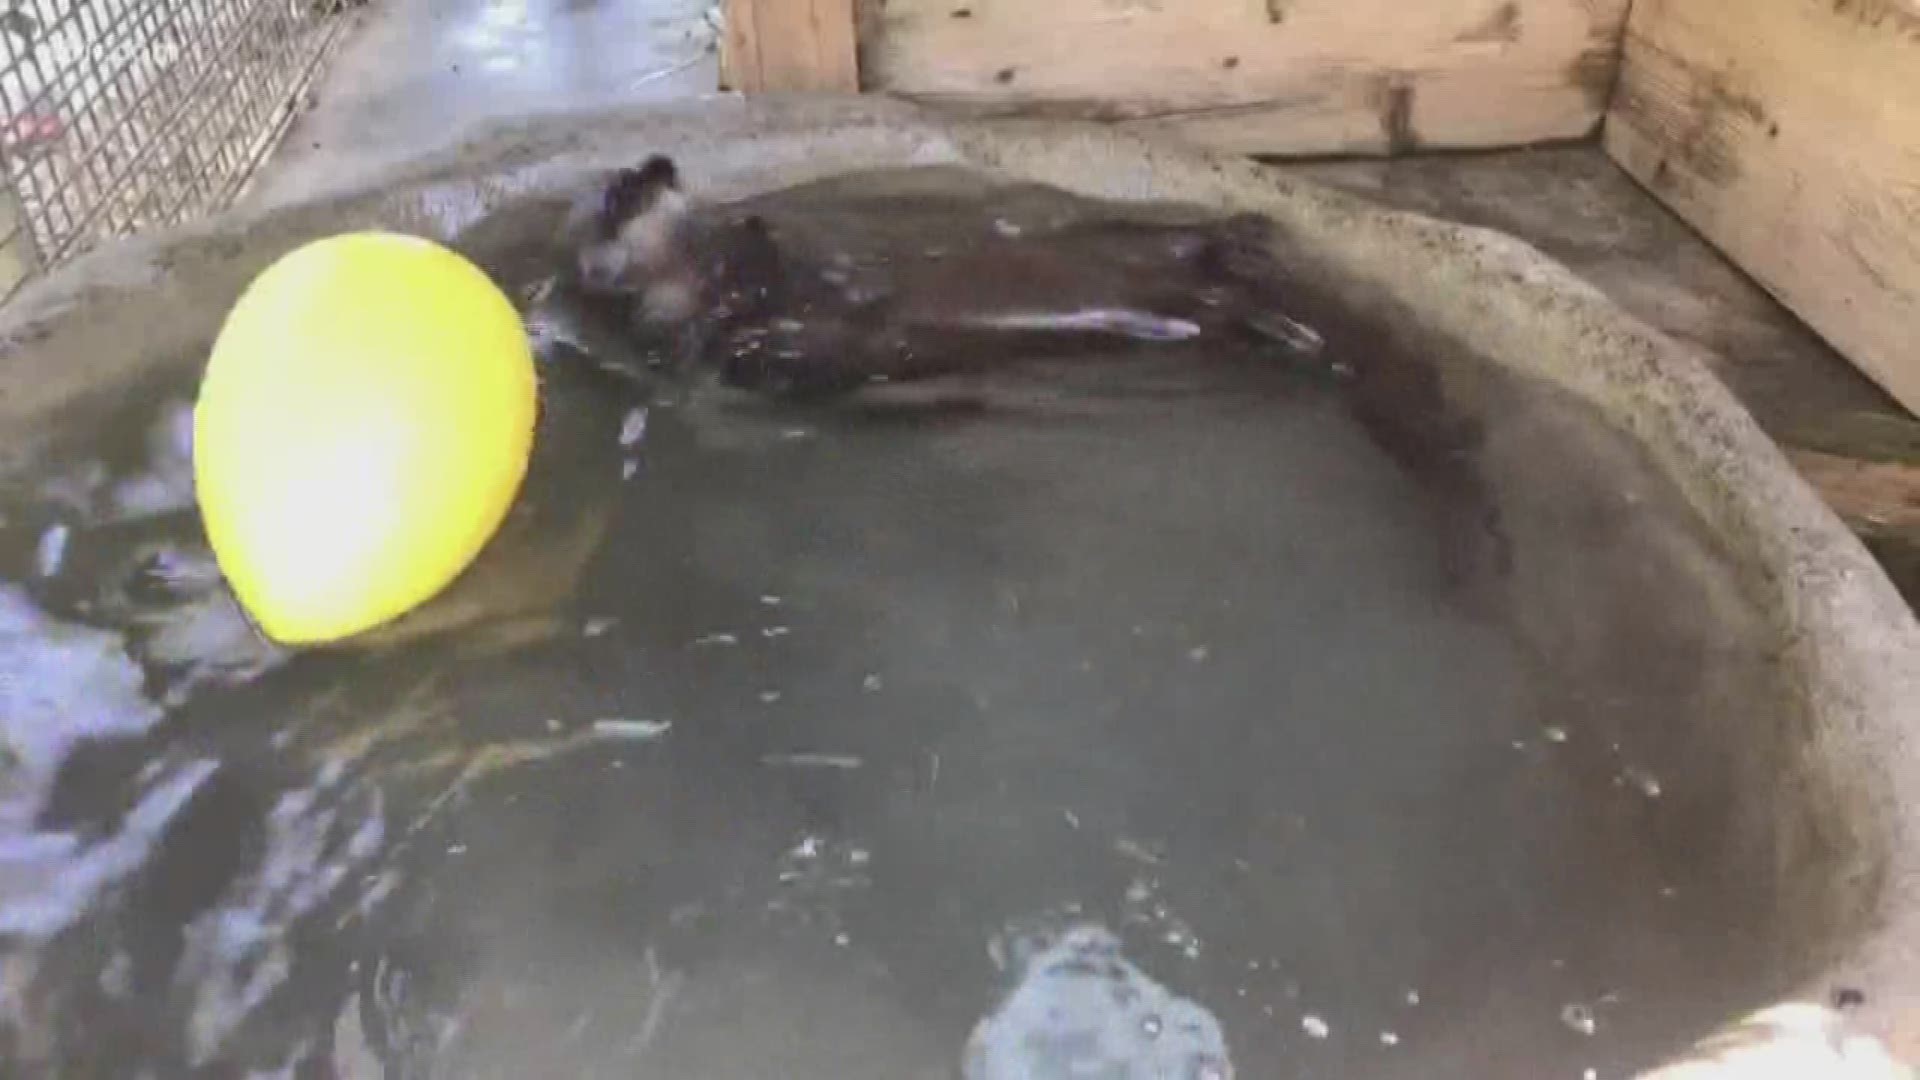 Zoo Knoxville continues their educational videos, "Bringing the zoo to you". Today they cover the care for their river otters, zooknoxville.org. March 27, 2020-4pm.